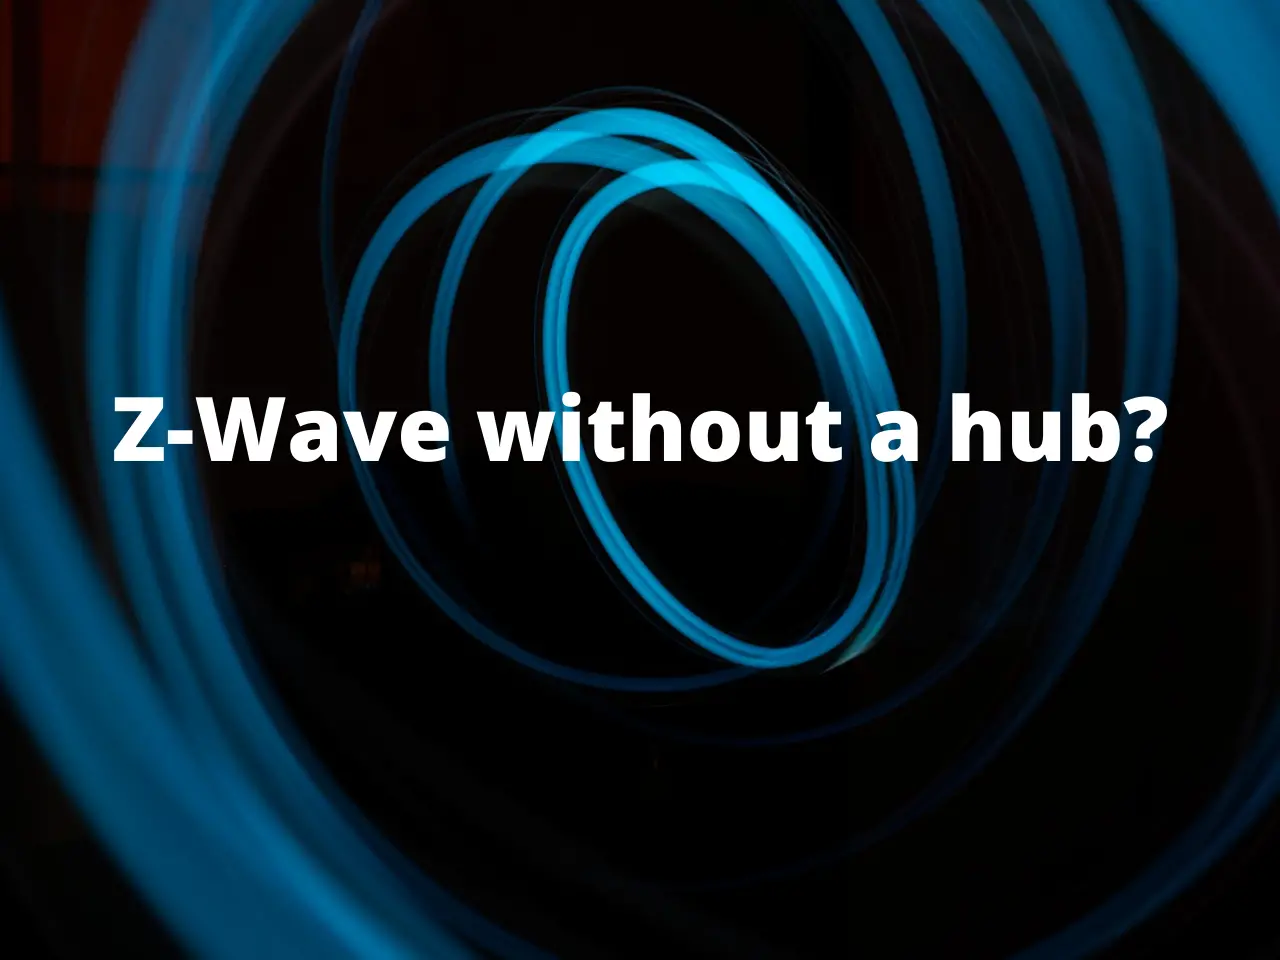 Zwave without a hub?